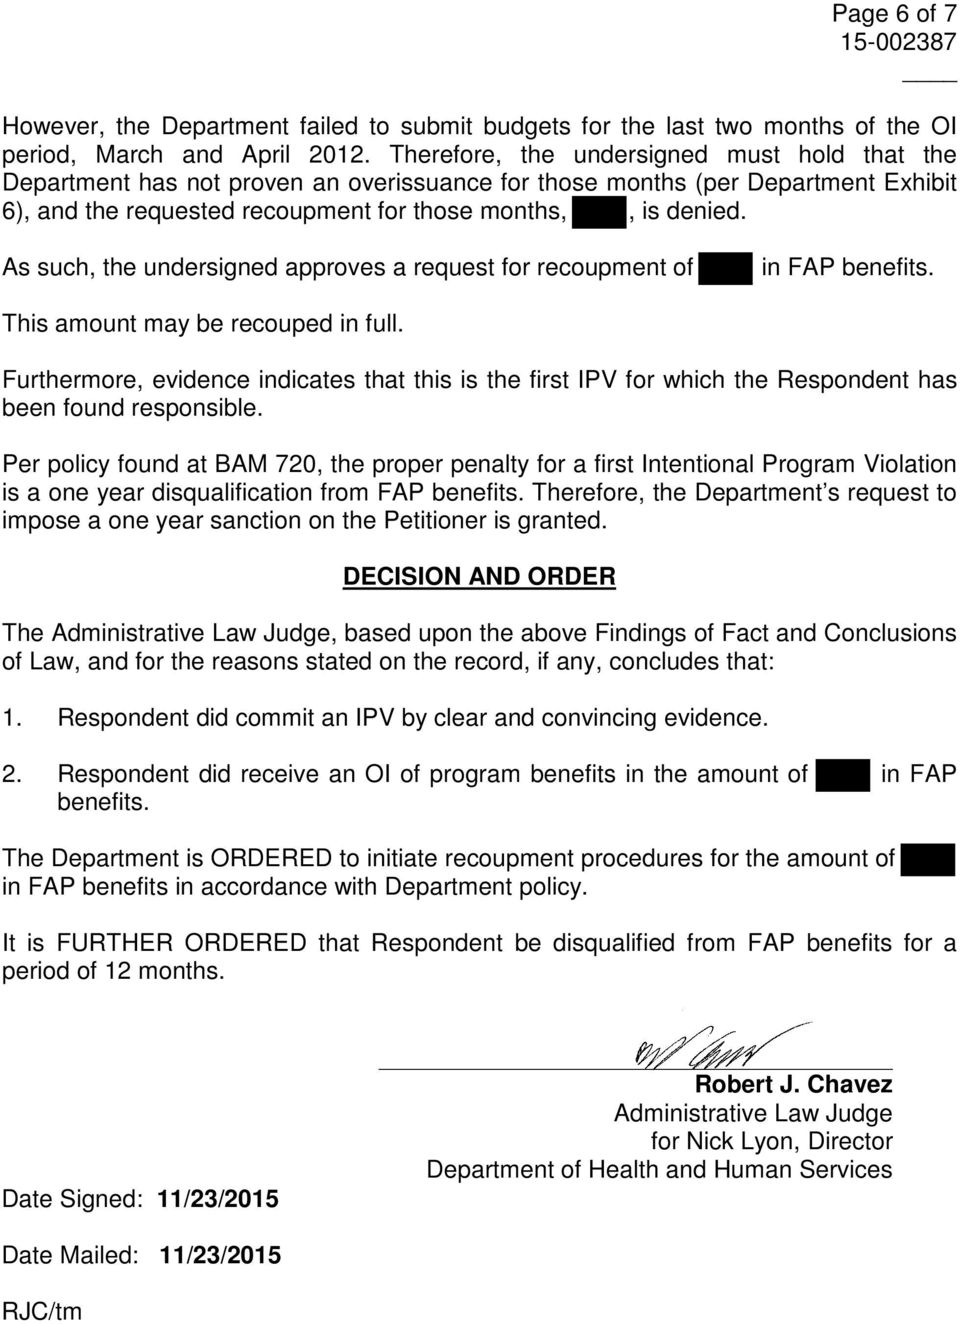 As such, the undersigned approves a request for recoupment of in FAP benefits. This amount may be recouped in full.